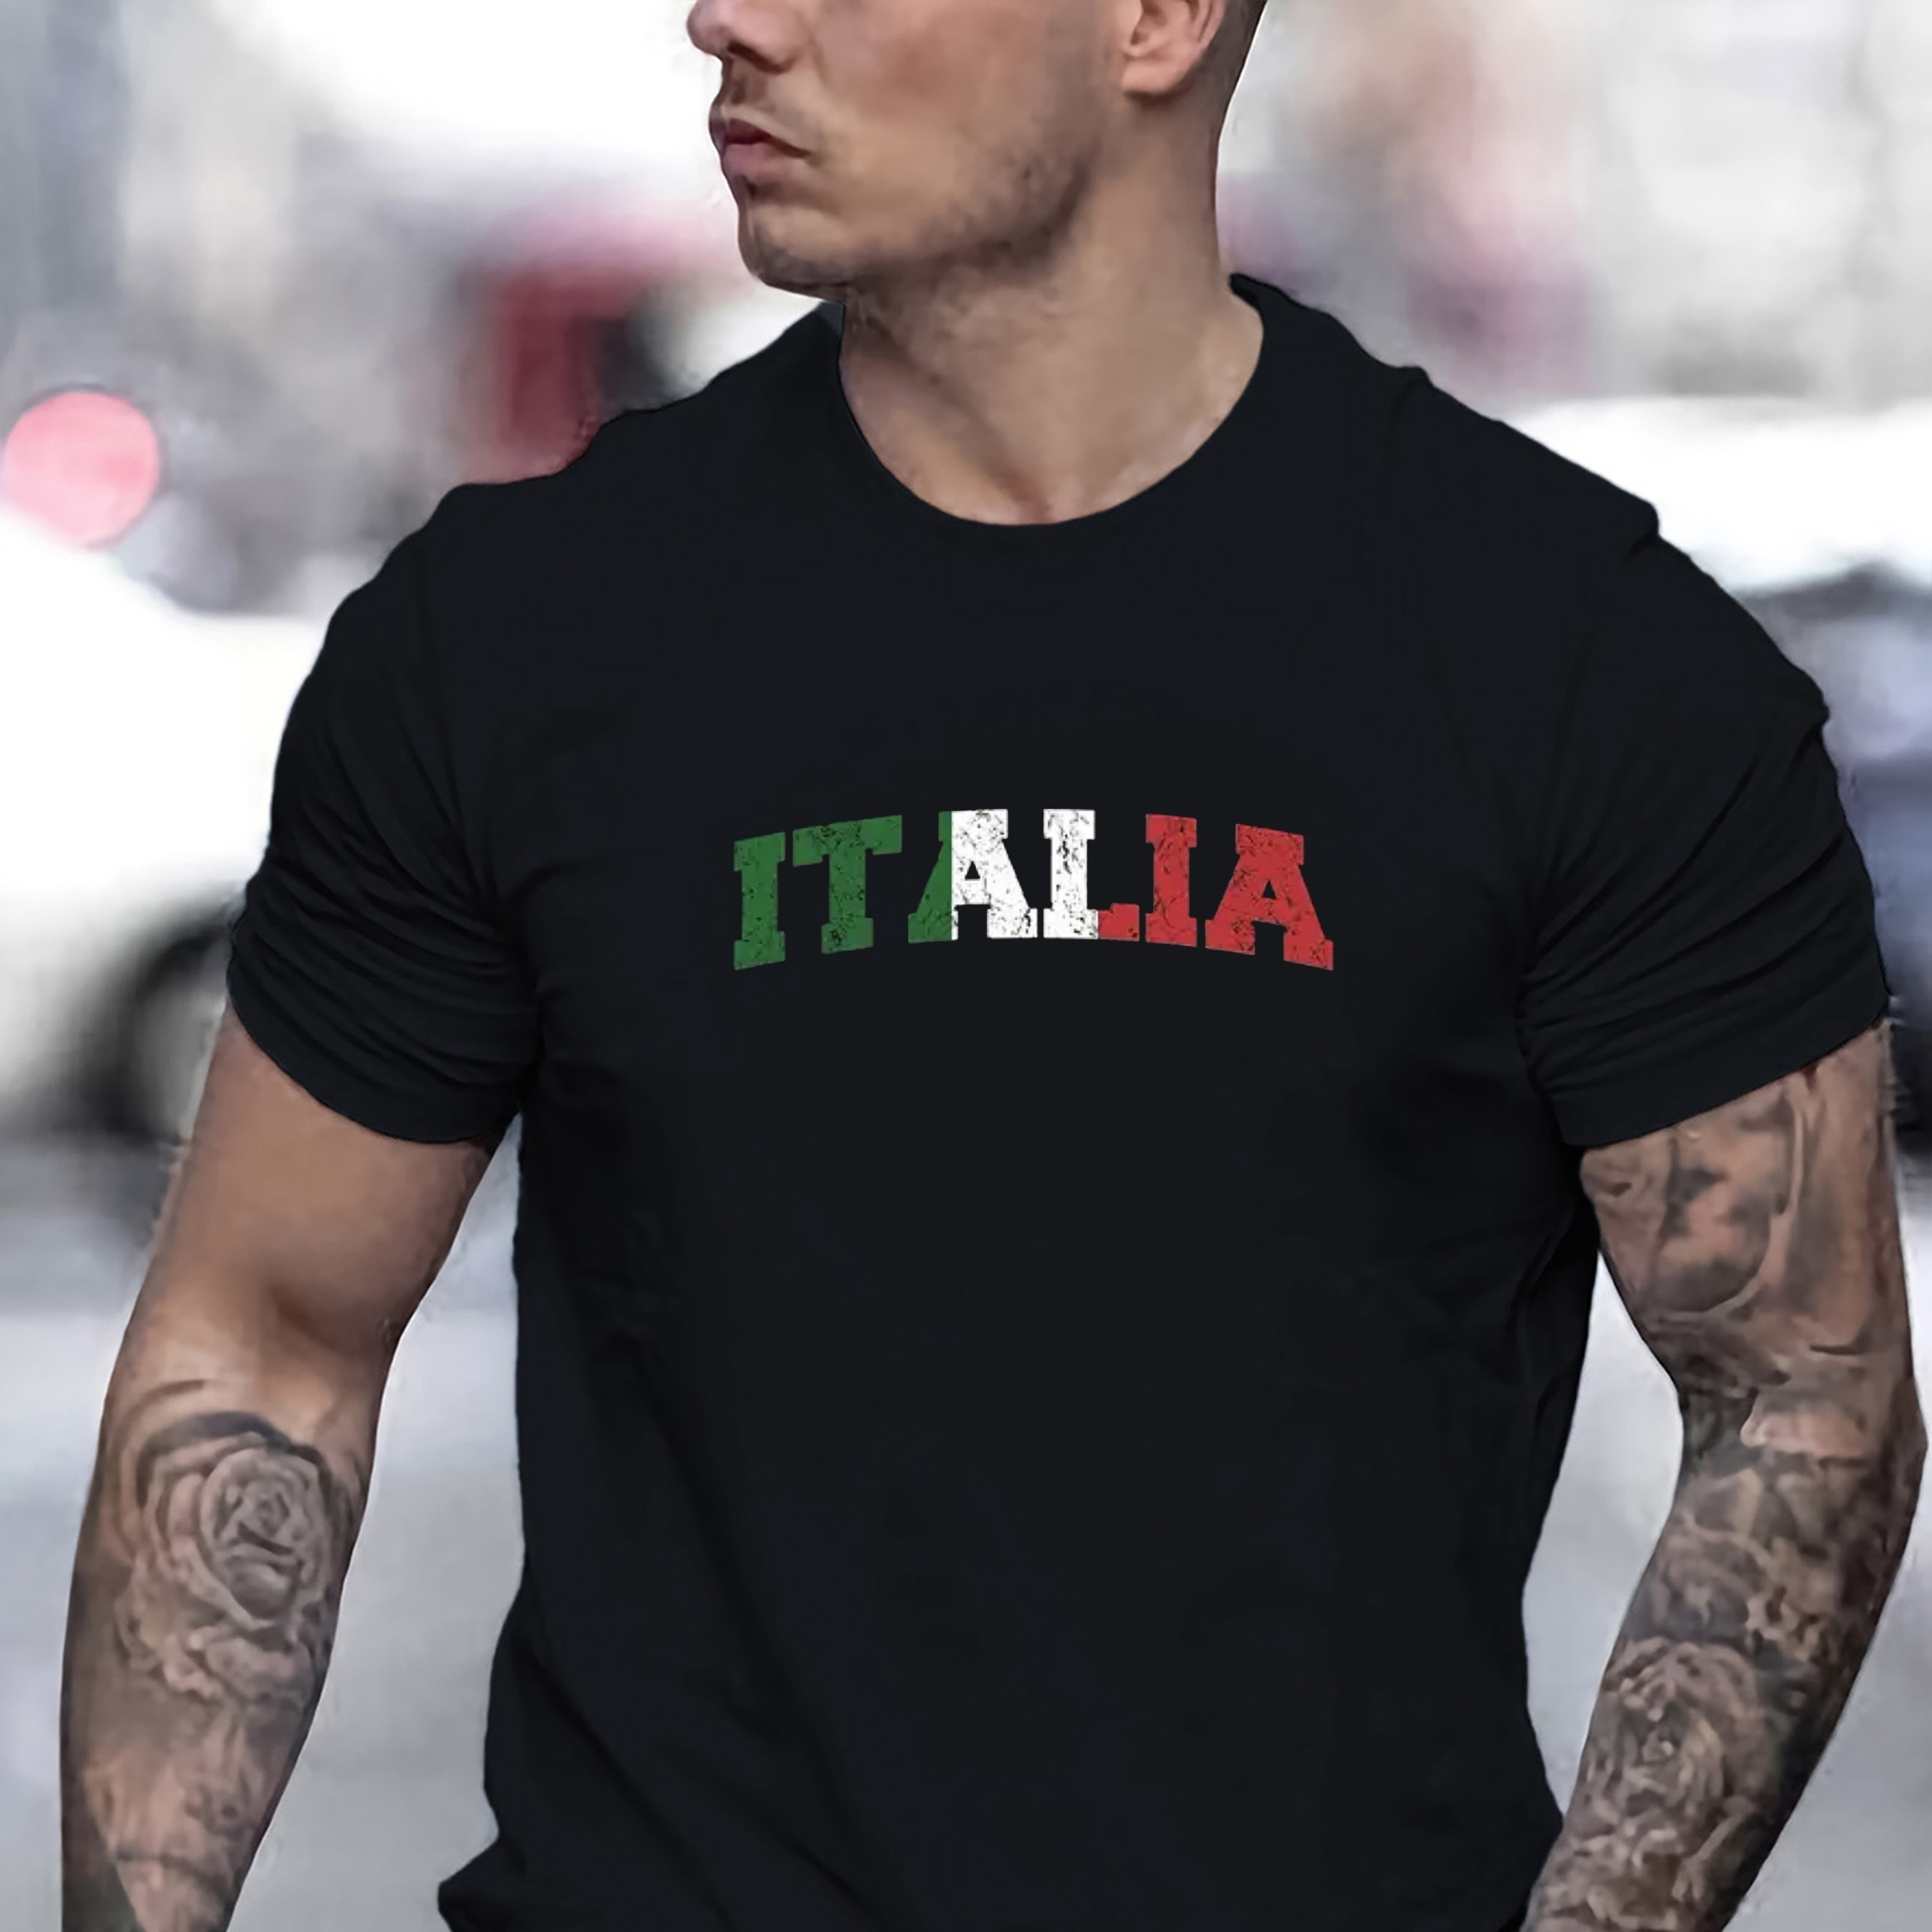 

Italia Letter Graphic Print Men's Creative Top, Casual Short Sleeve Crew Neck T-shirt, Men's Clothing For Summer Outdoor